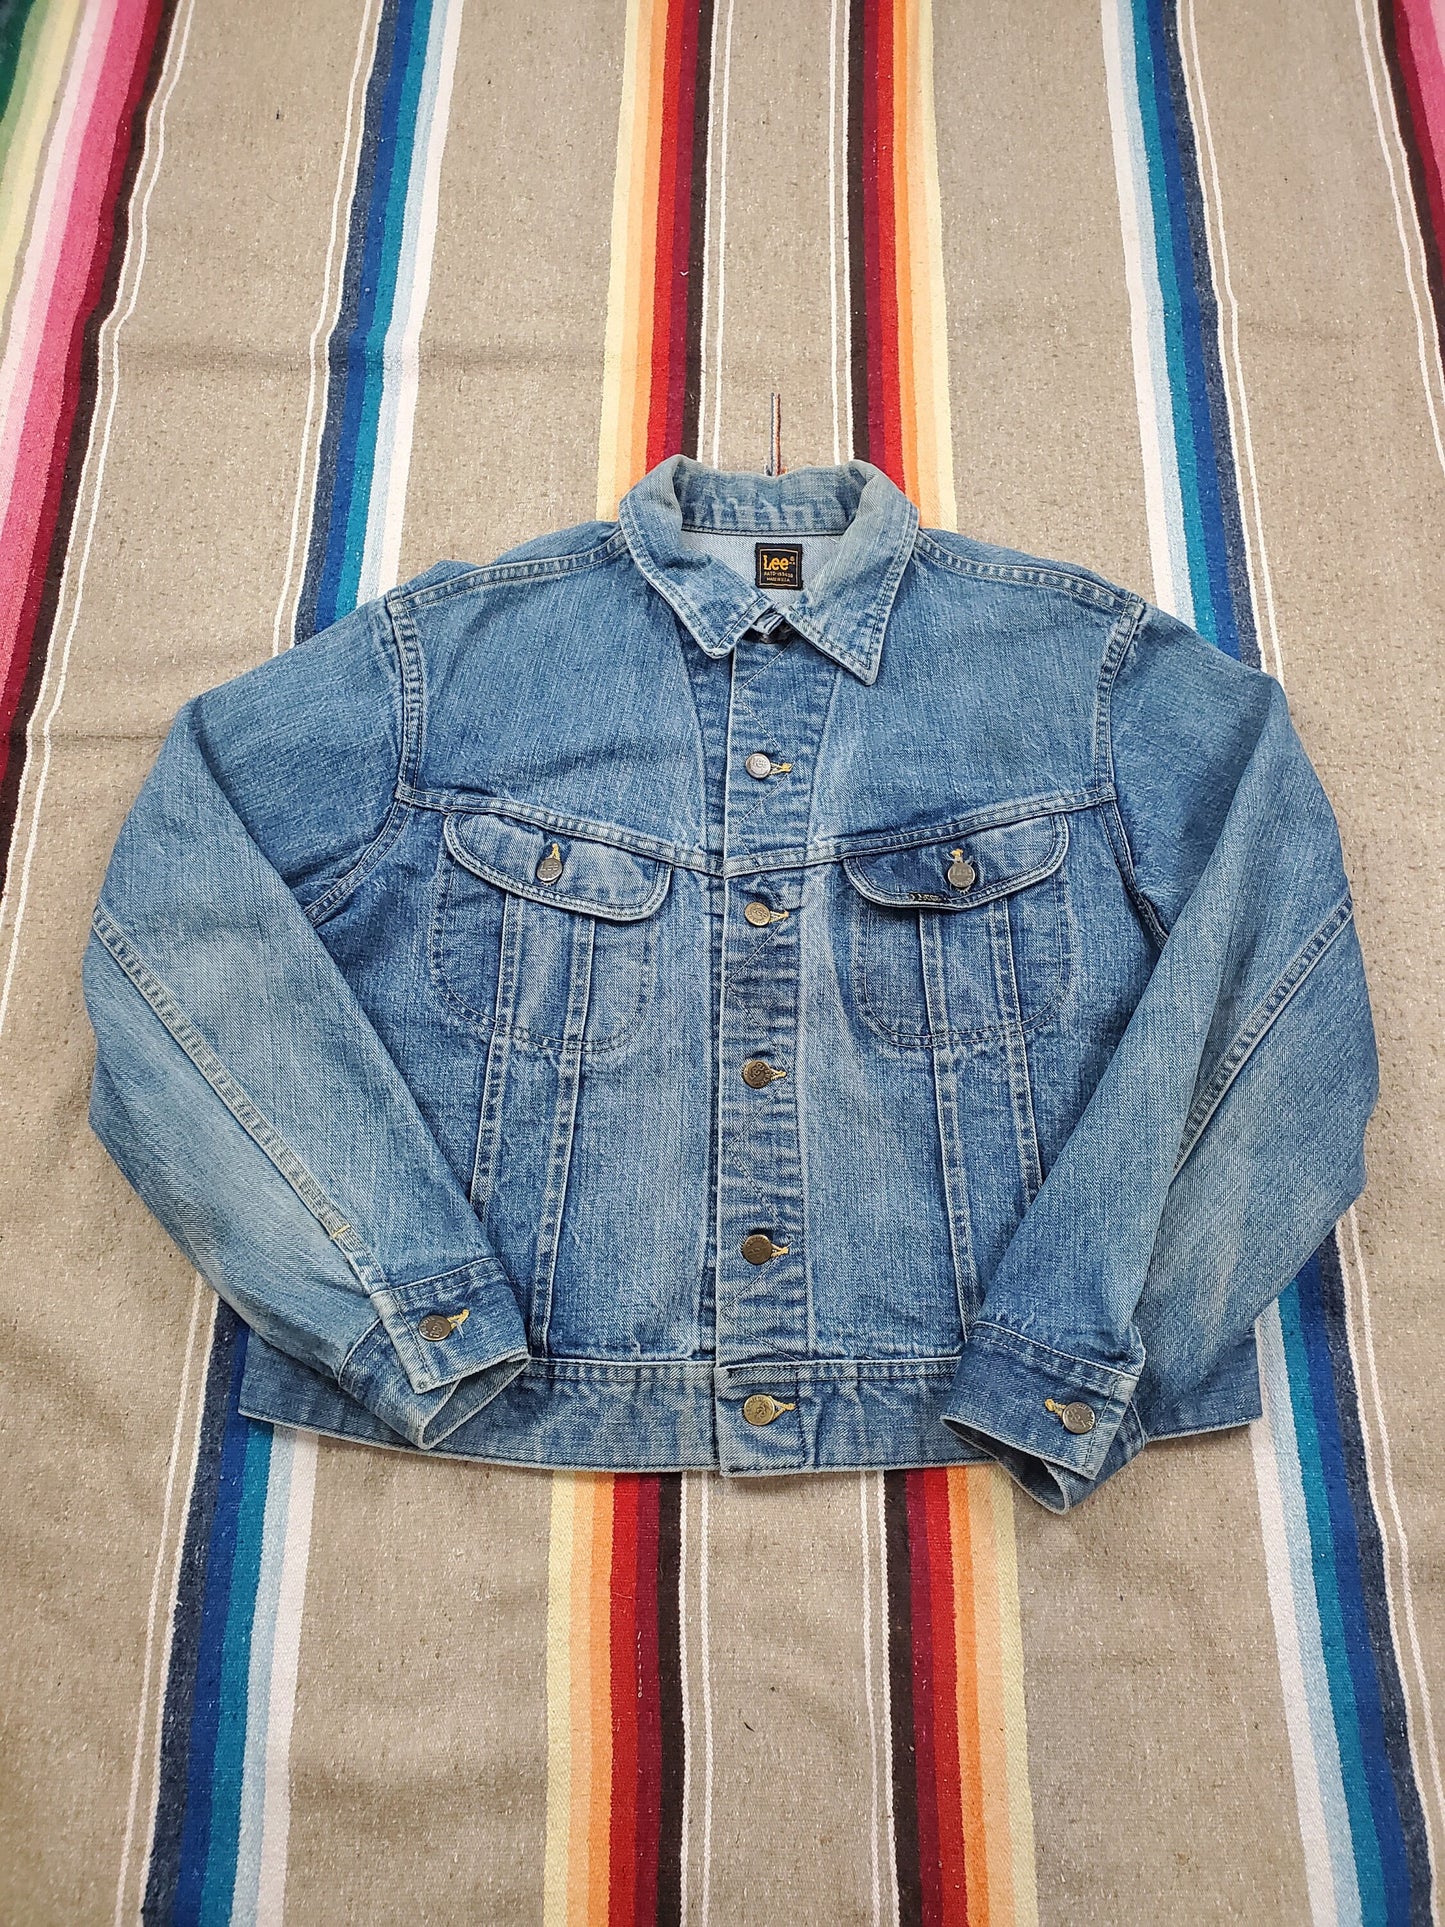 1970s/1980s Lee Riders Denim Trucker Jacket Made in USA Size M/L